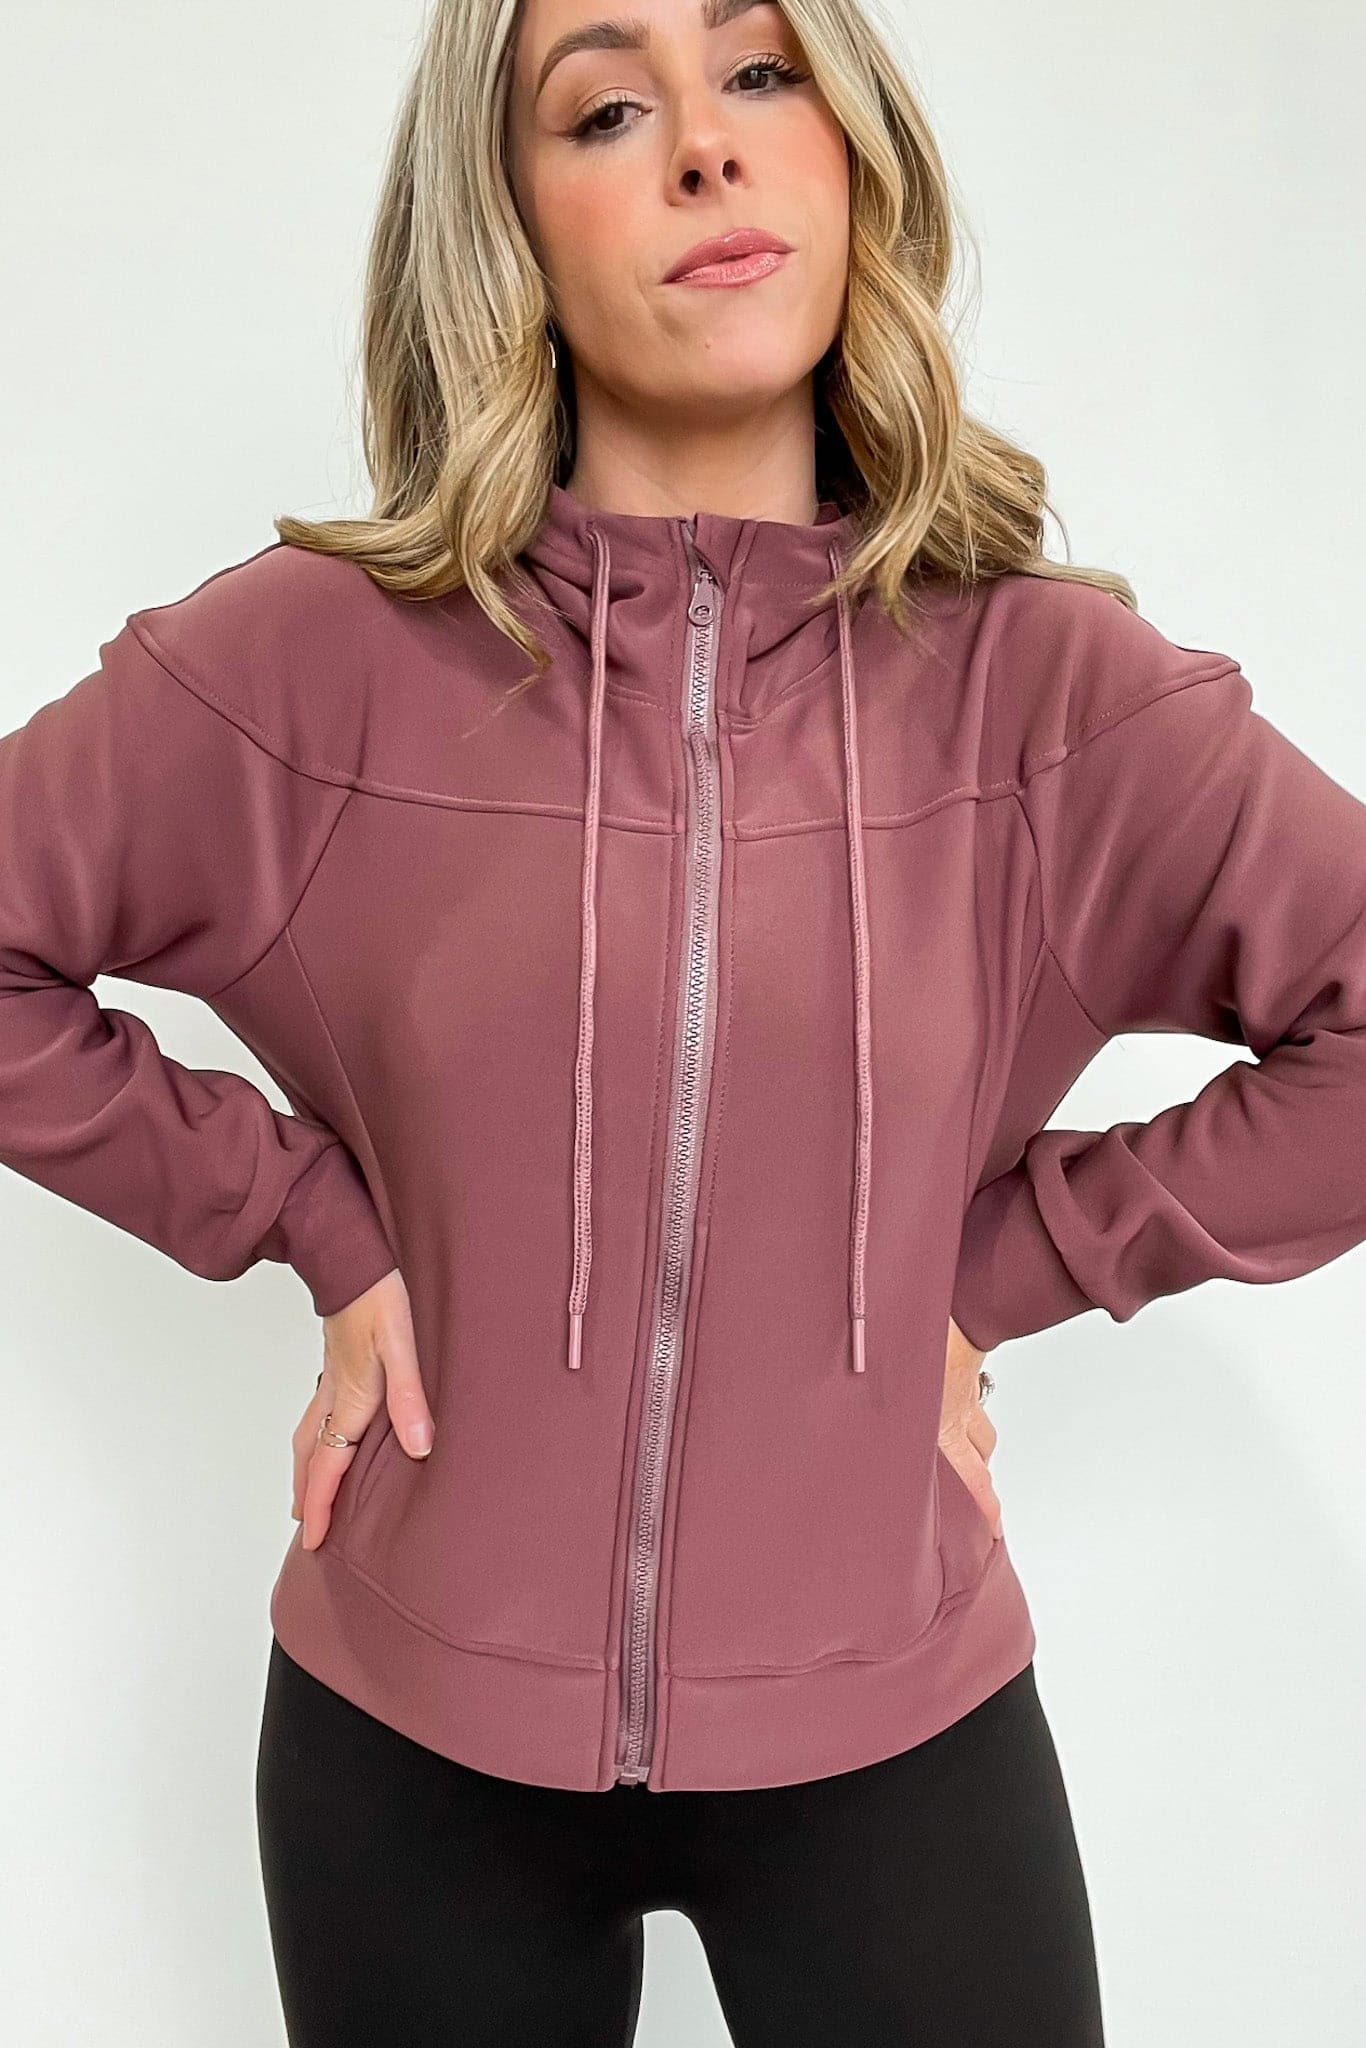  Synoy Scuba Knit Zip Hooded Jacket - Madison and Mallory